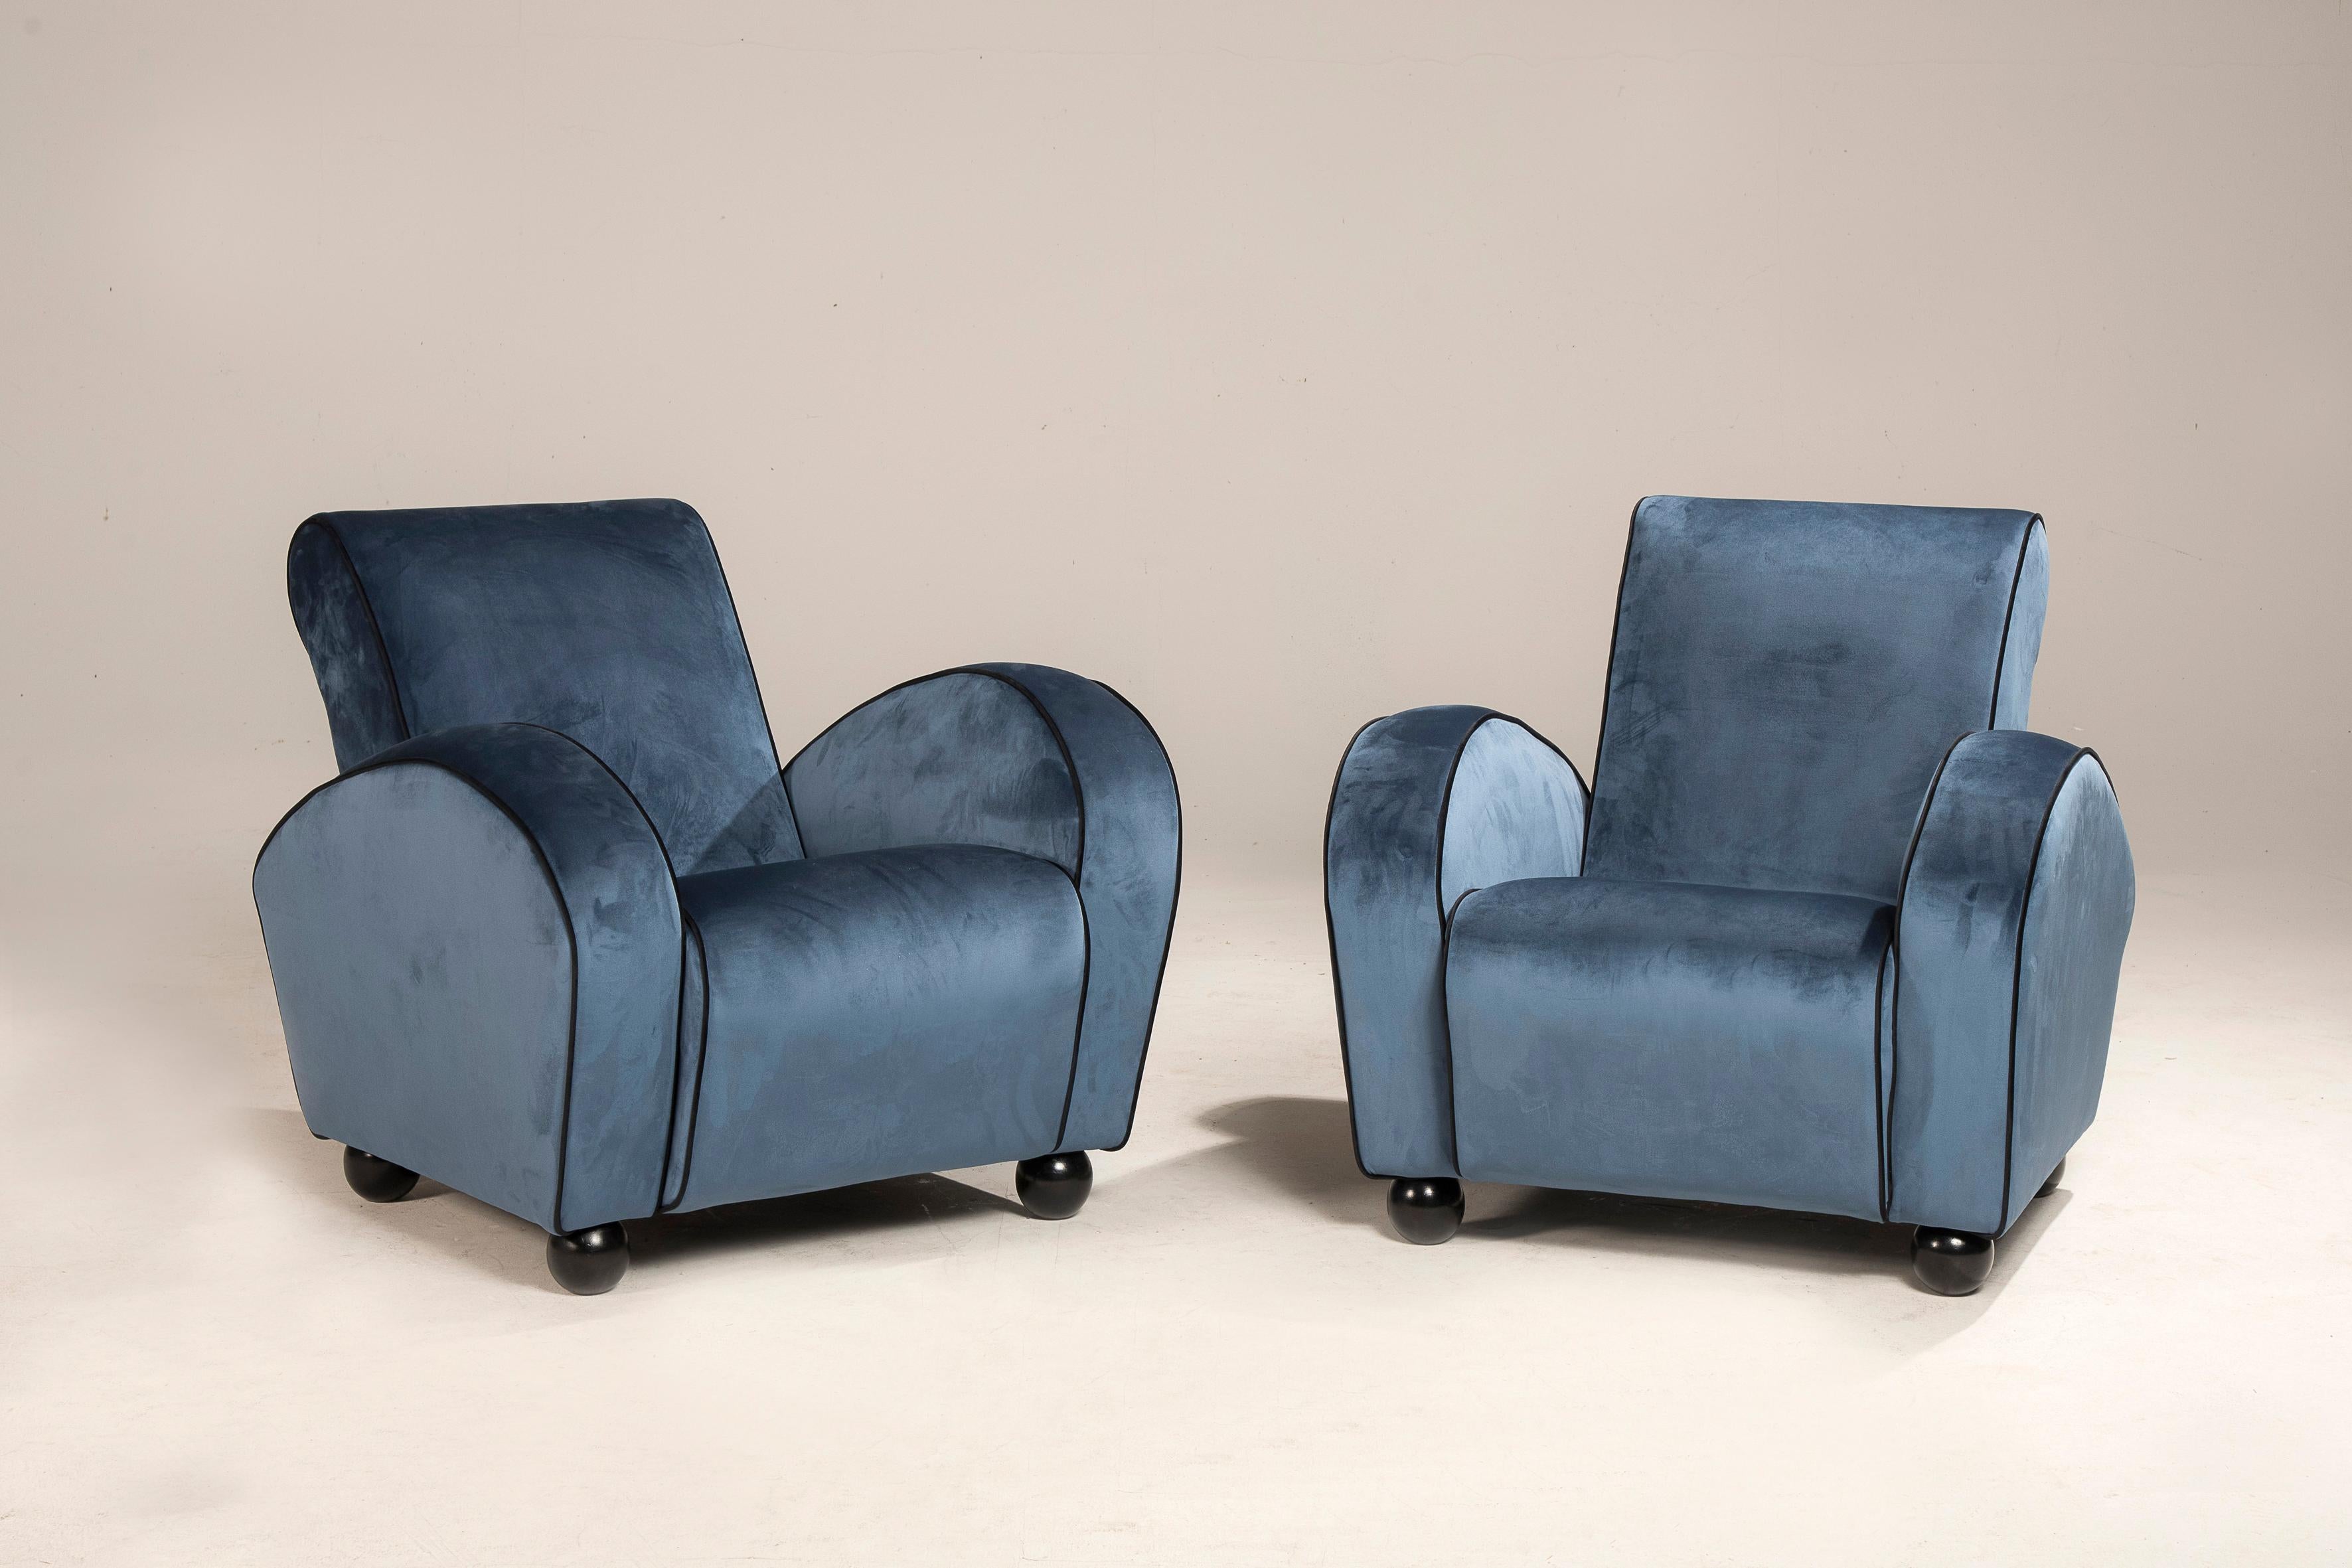 Pair of Art Deco armchairs in blue velvet with black borders.
The armchairs have been reupholstered with hand-tailored finishes.

Measurements: L. CM 80 x D. CM 80 x H. CM 83 - seat height 42 cm

The price refers to the pair.